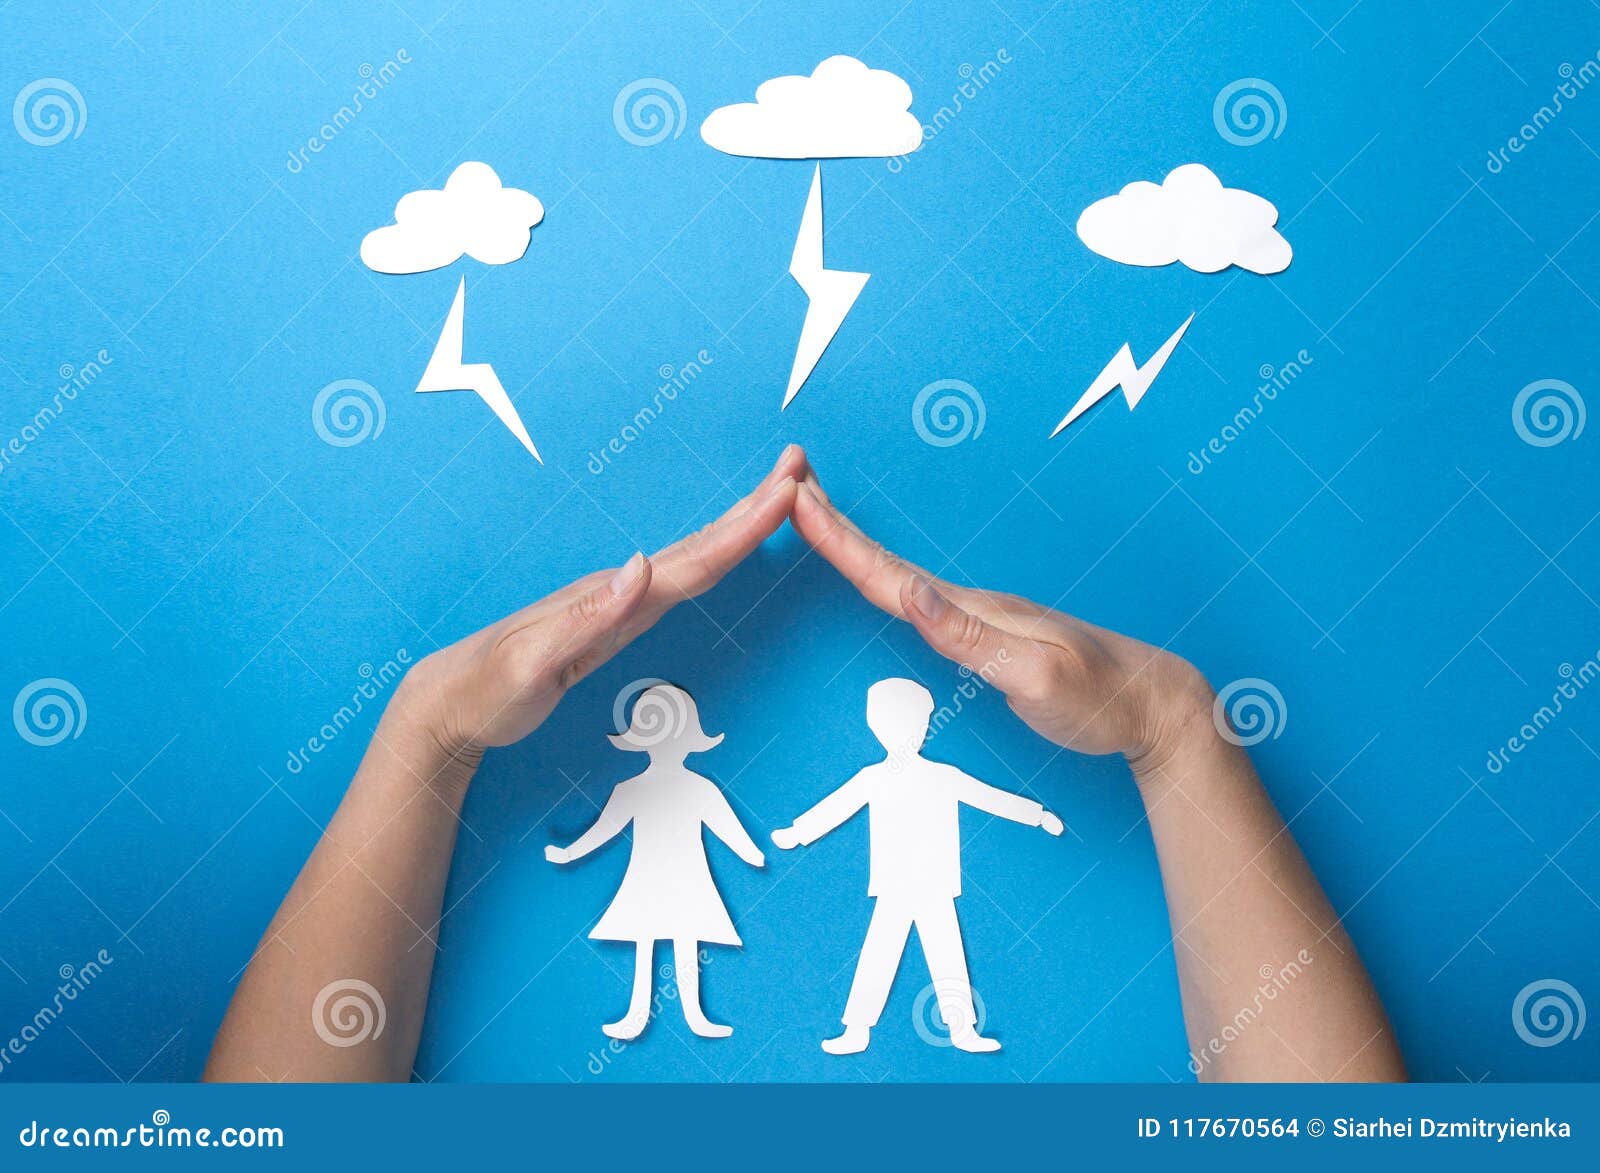 life insurance and family health concept. hands protect paper figures origami from lightning from the clouds on blue background